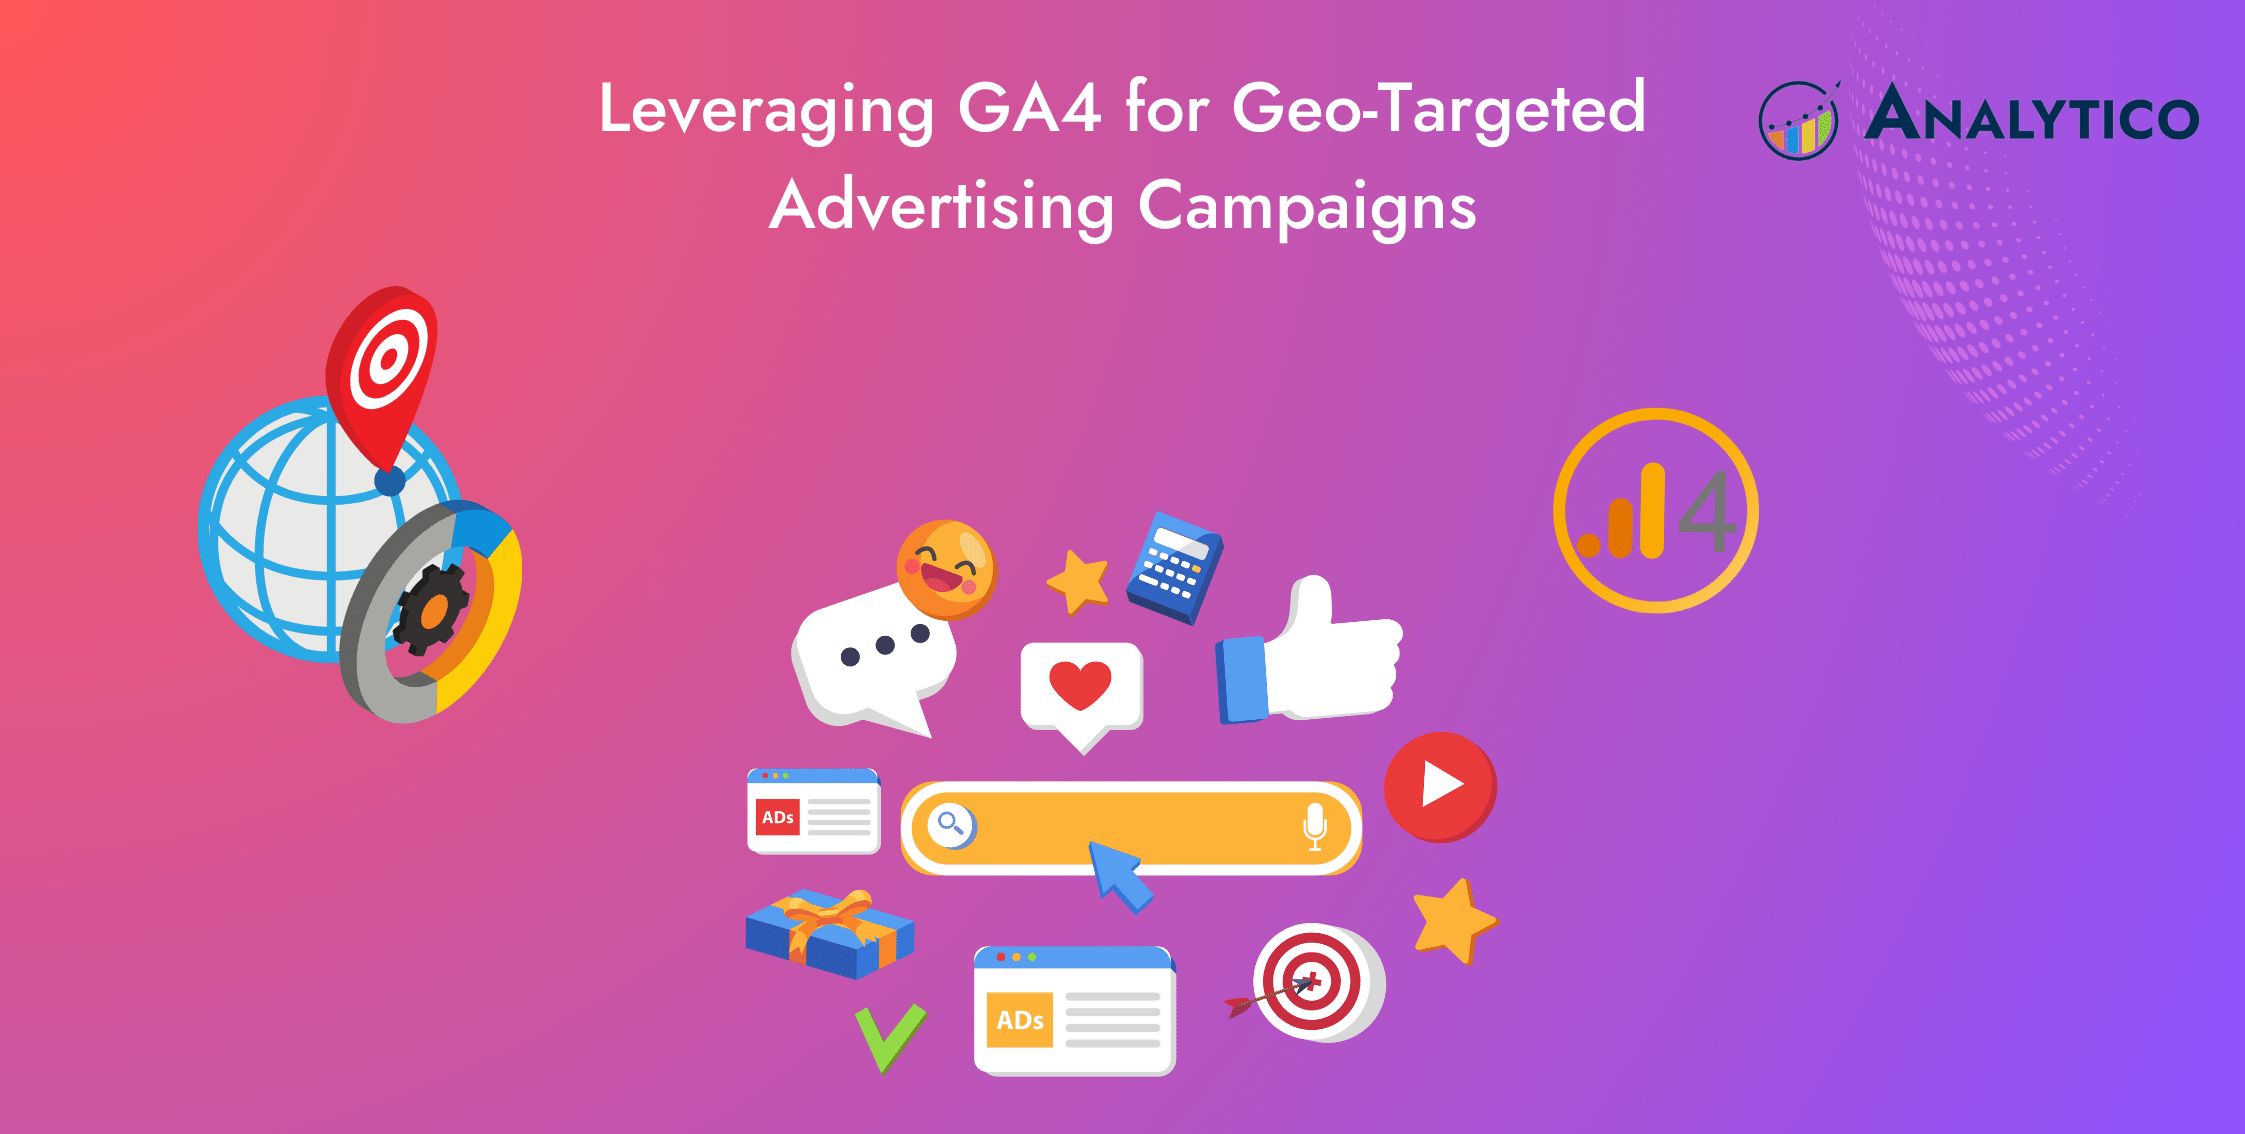 Leveraging GA4 for Geo-Targeted Advertising Campaigns